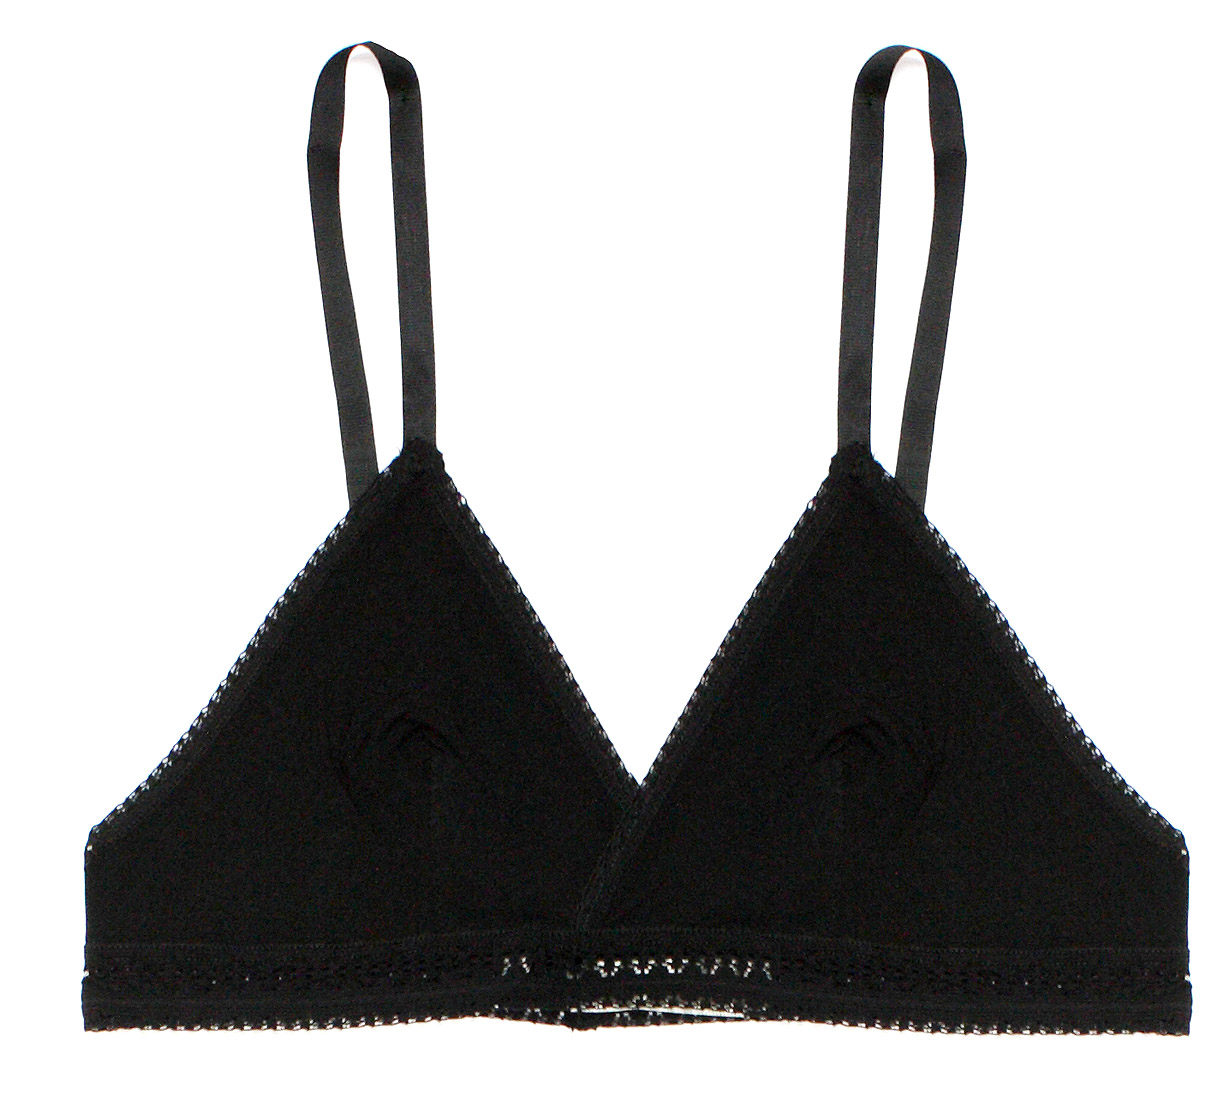 Basic Play Black Modal Underwear & Daywear | Fine Lingerie for Everyday | Between the Sheets Designer Intimates 